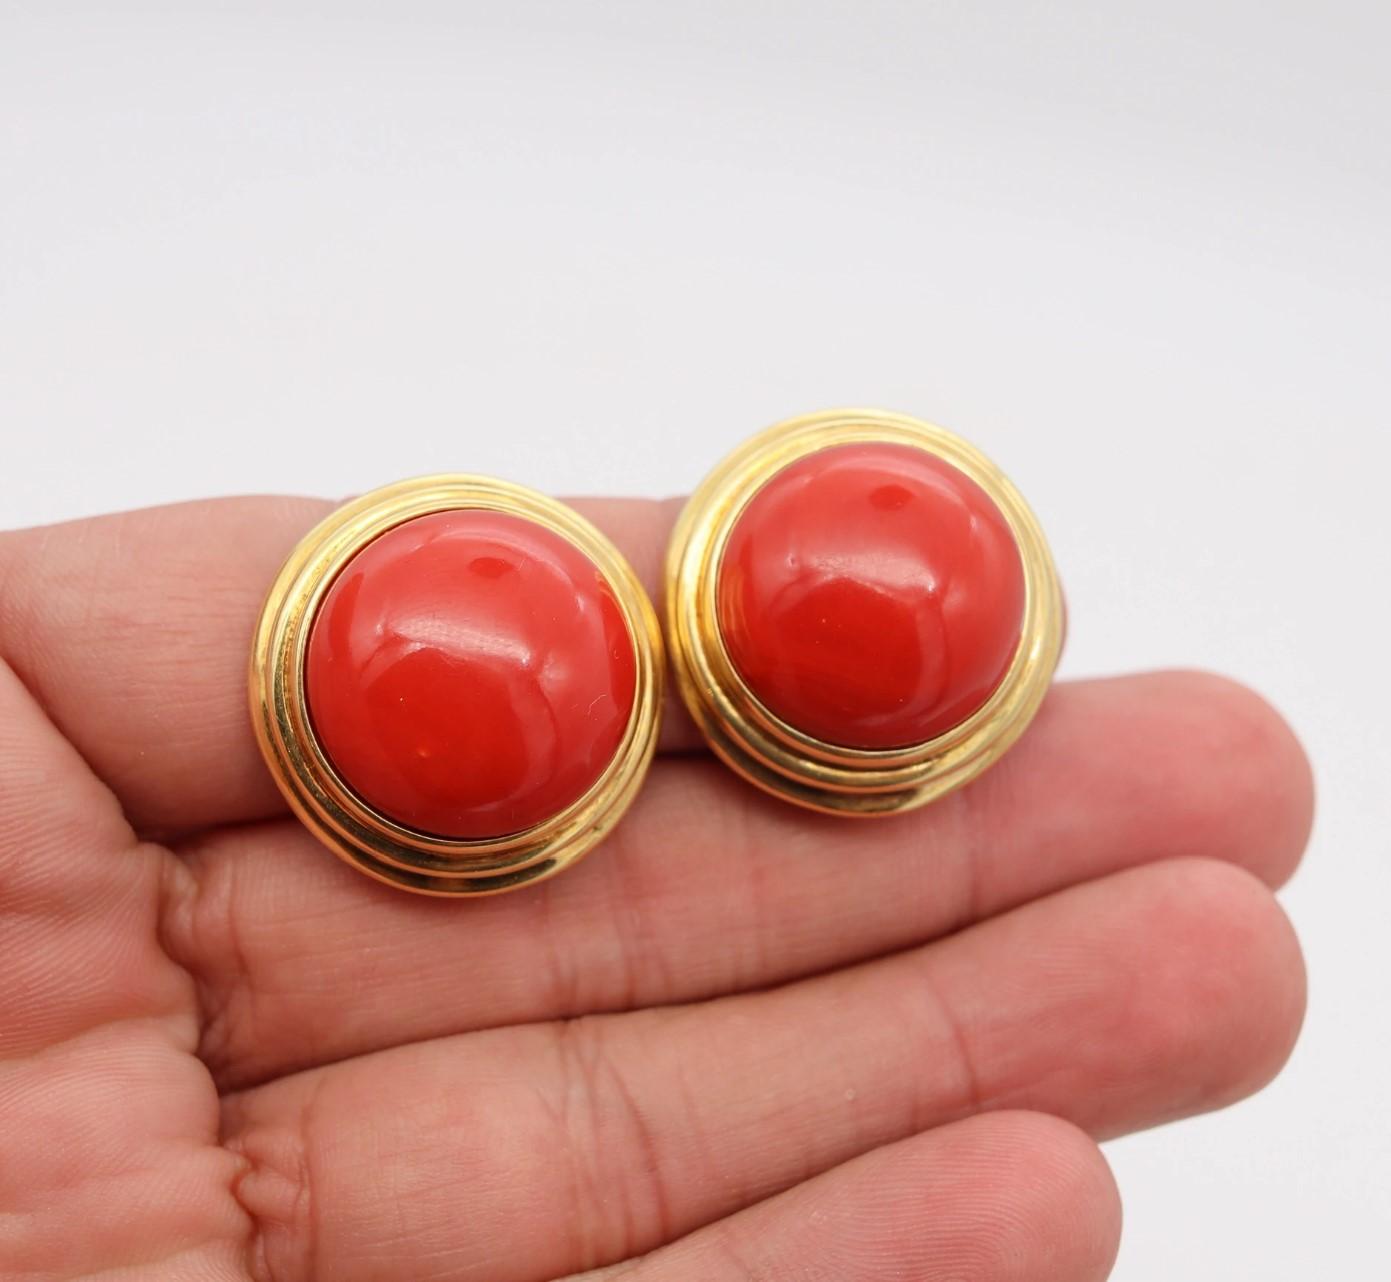 Cabochon Cellino 1970 Italy Massive Earrings in 18Kt Gold 70.2 Ctw Sardinian Red Coral For Sale